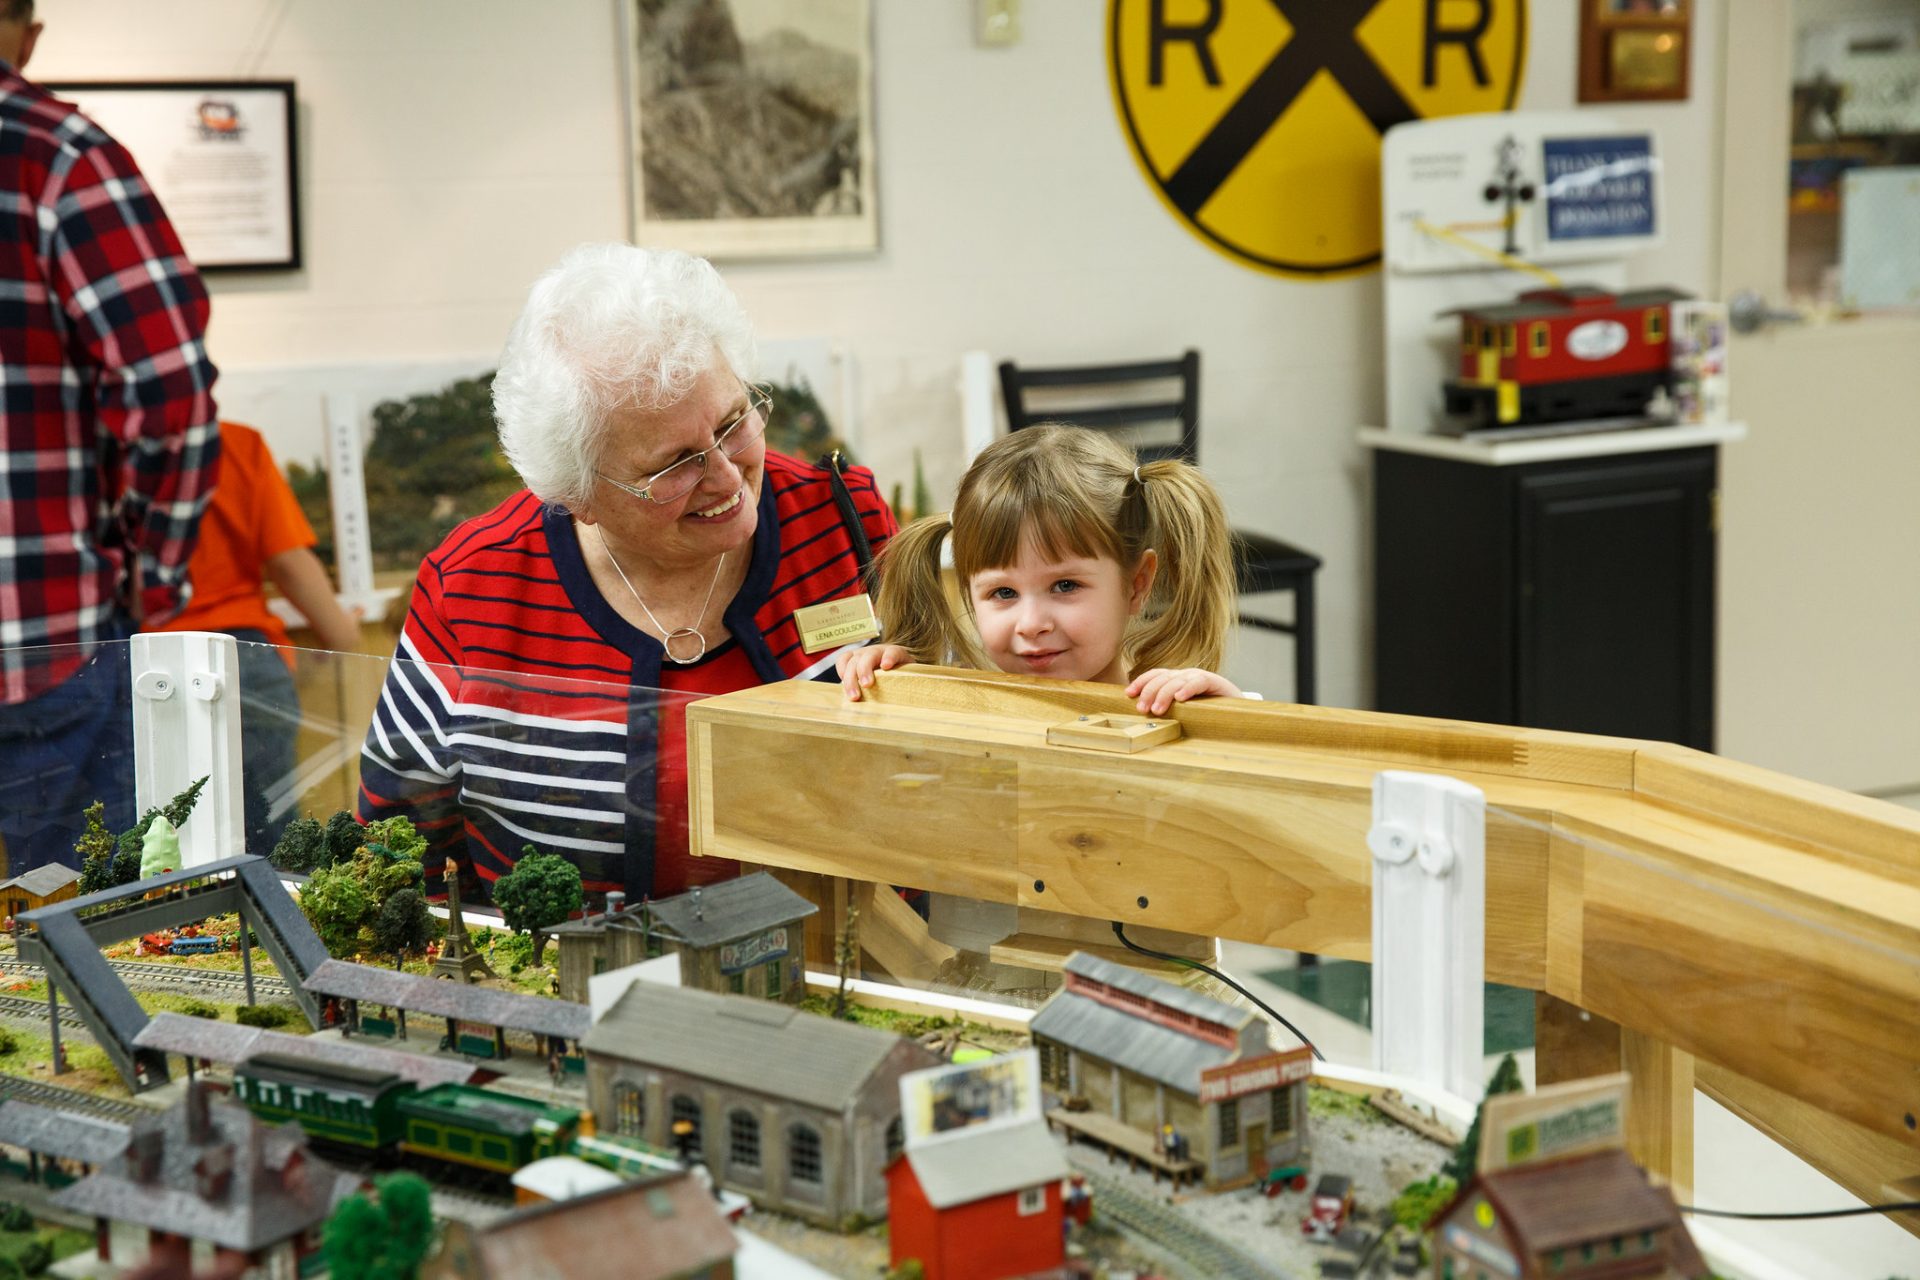 Our Train Room Open Houses appeal to all ages